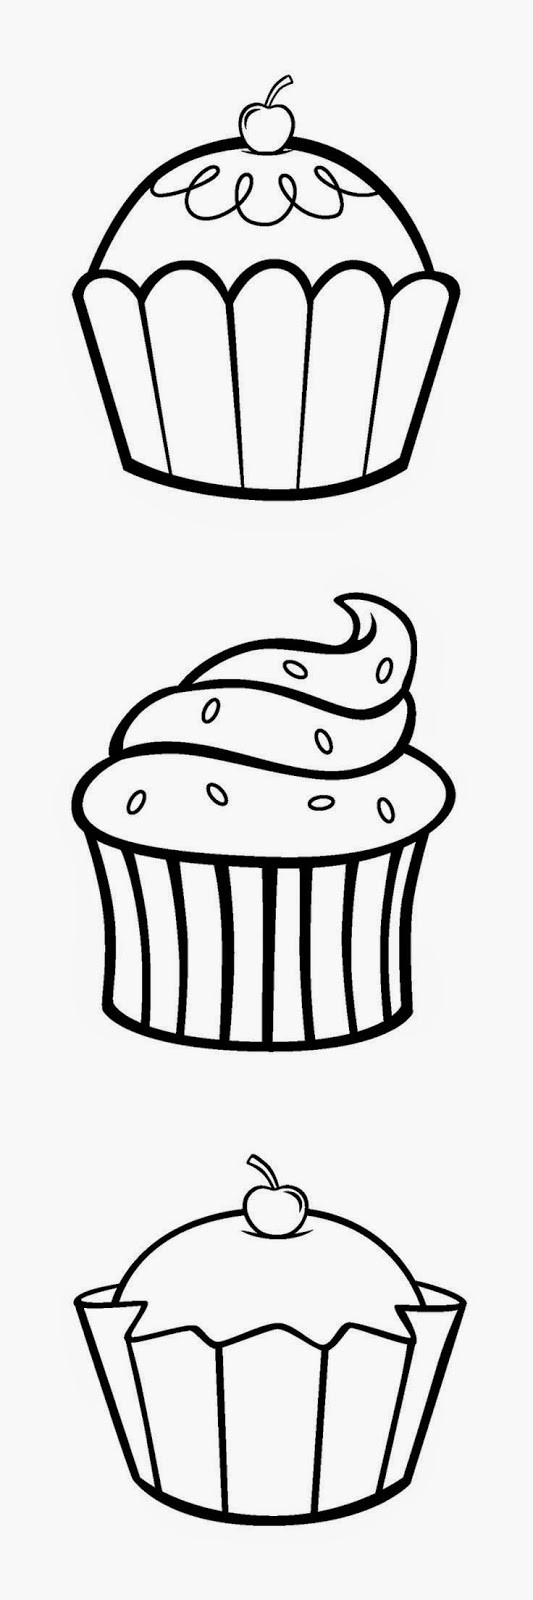 Cupcake Printable Coloring Pages
 Geography Blog Cupcake Coloring Pages